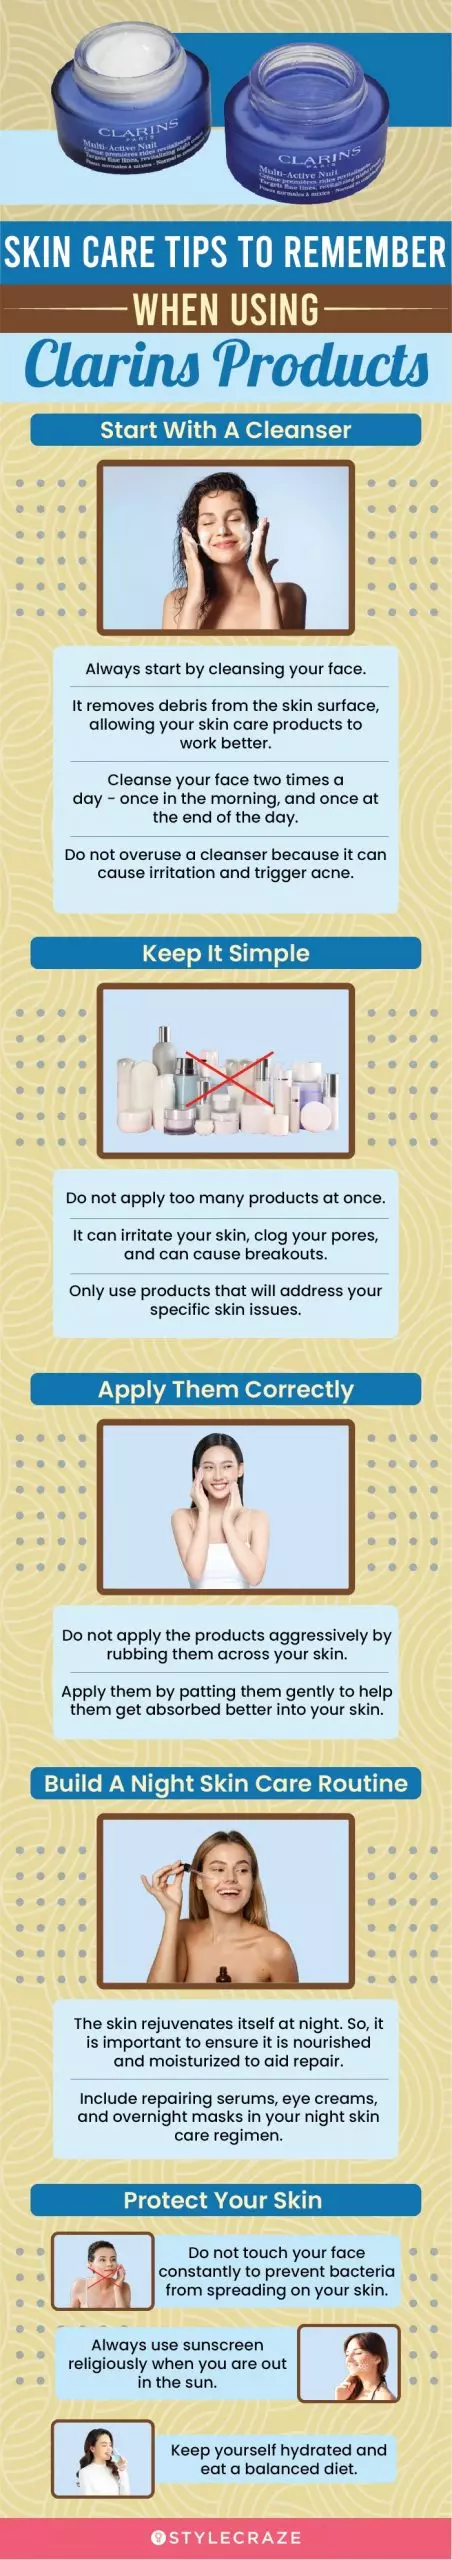 Skincare Tips To Remember When Using Clarins Products (infographic)